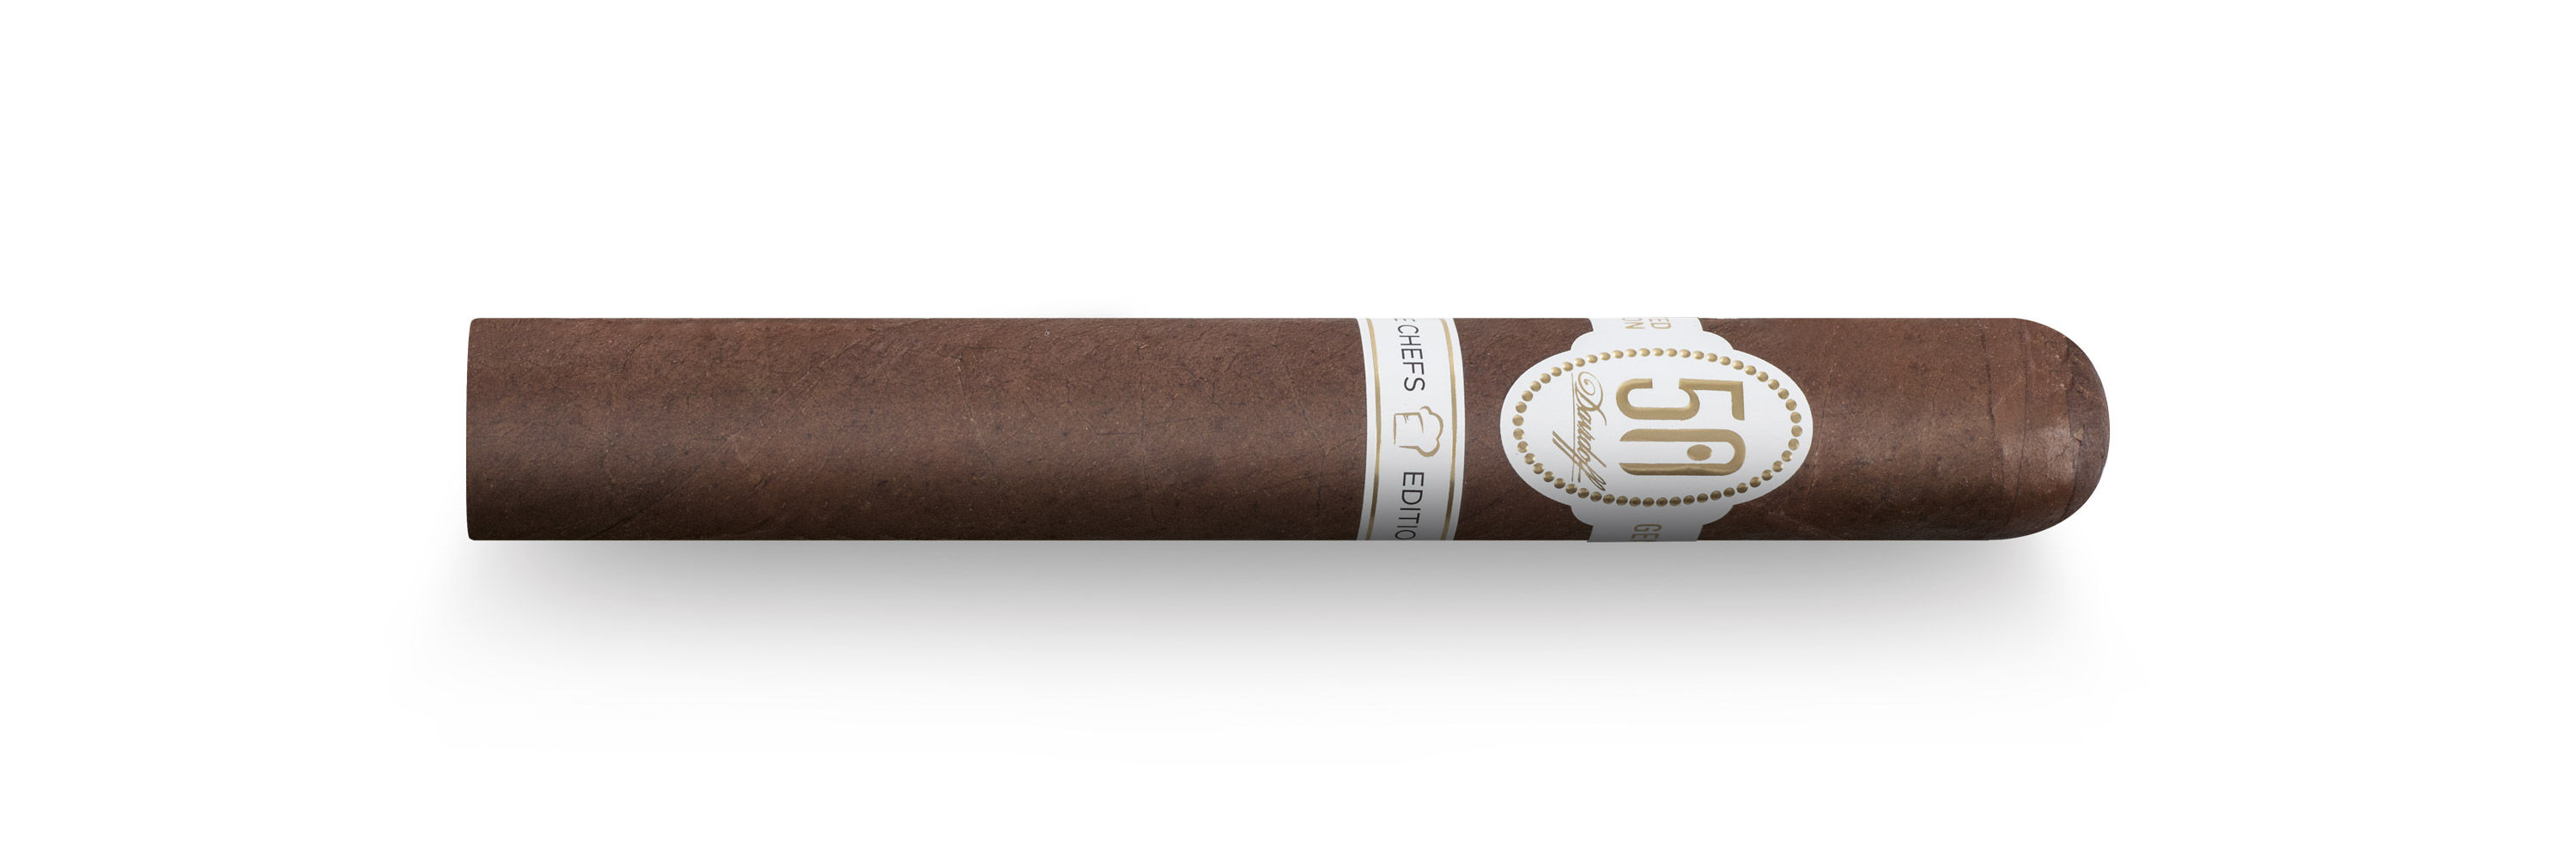 Davidoff releases a Michelin-starred cigar for their 50th anniversary